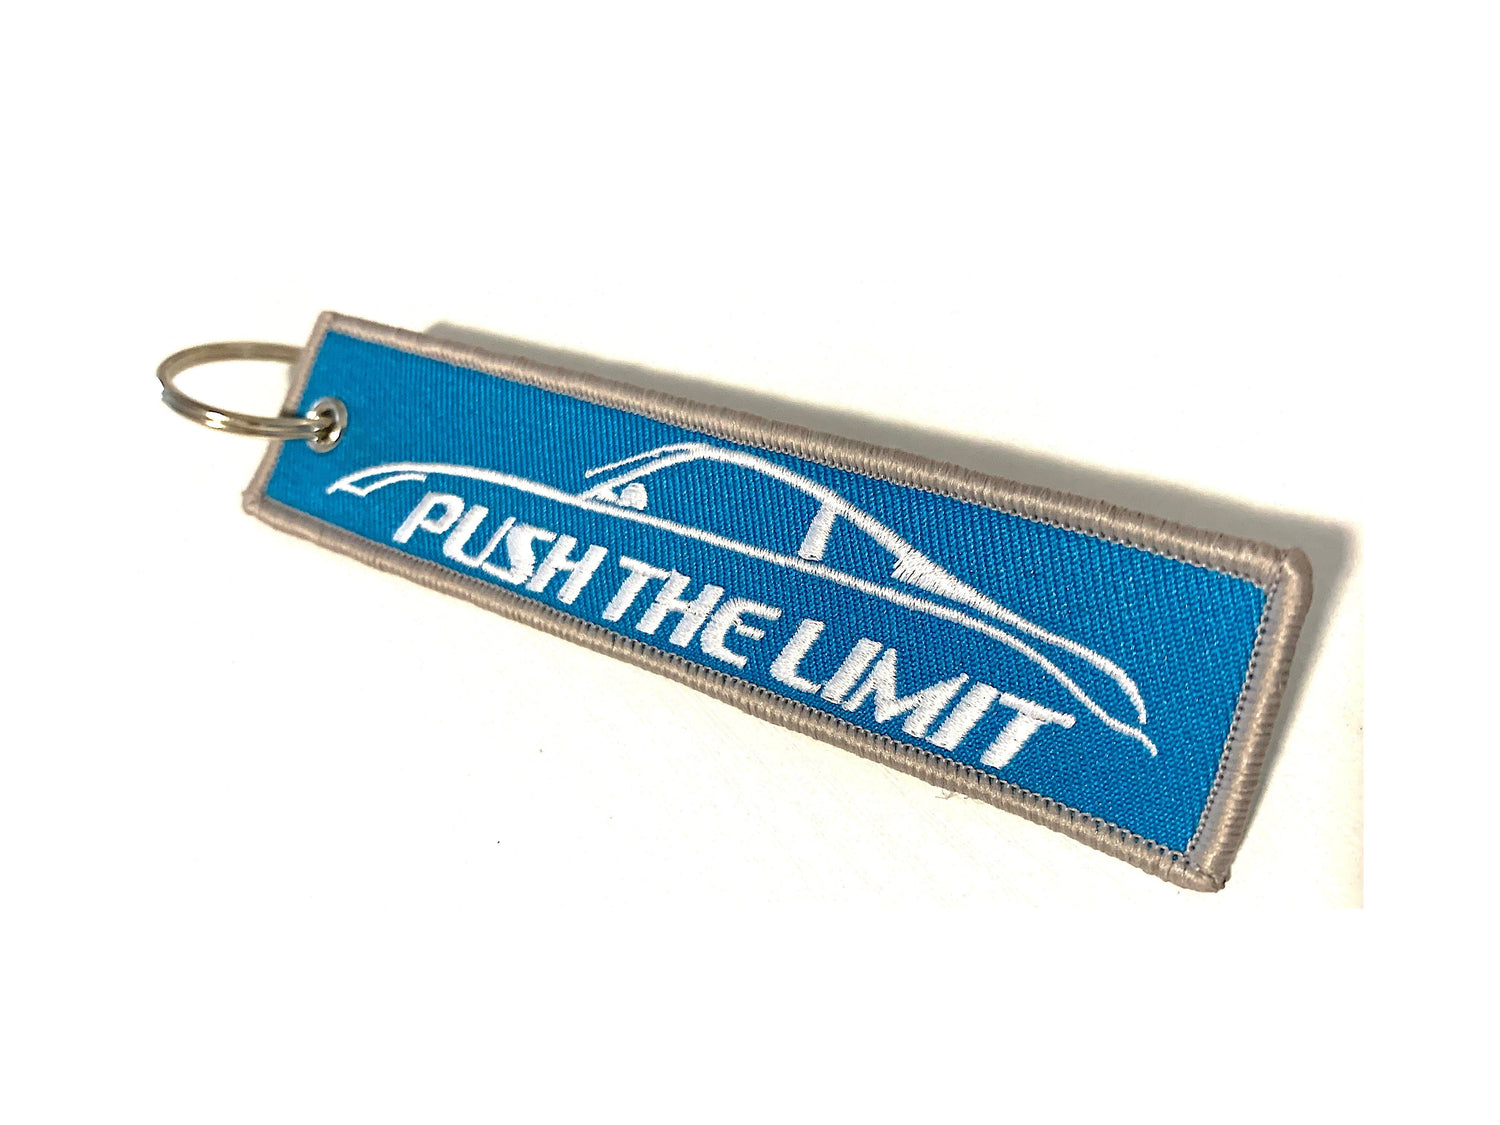 Push The Limit 350z Key Tag - Rico's Garage - Custom Decals, Banners and more!